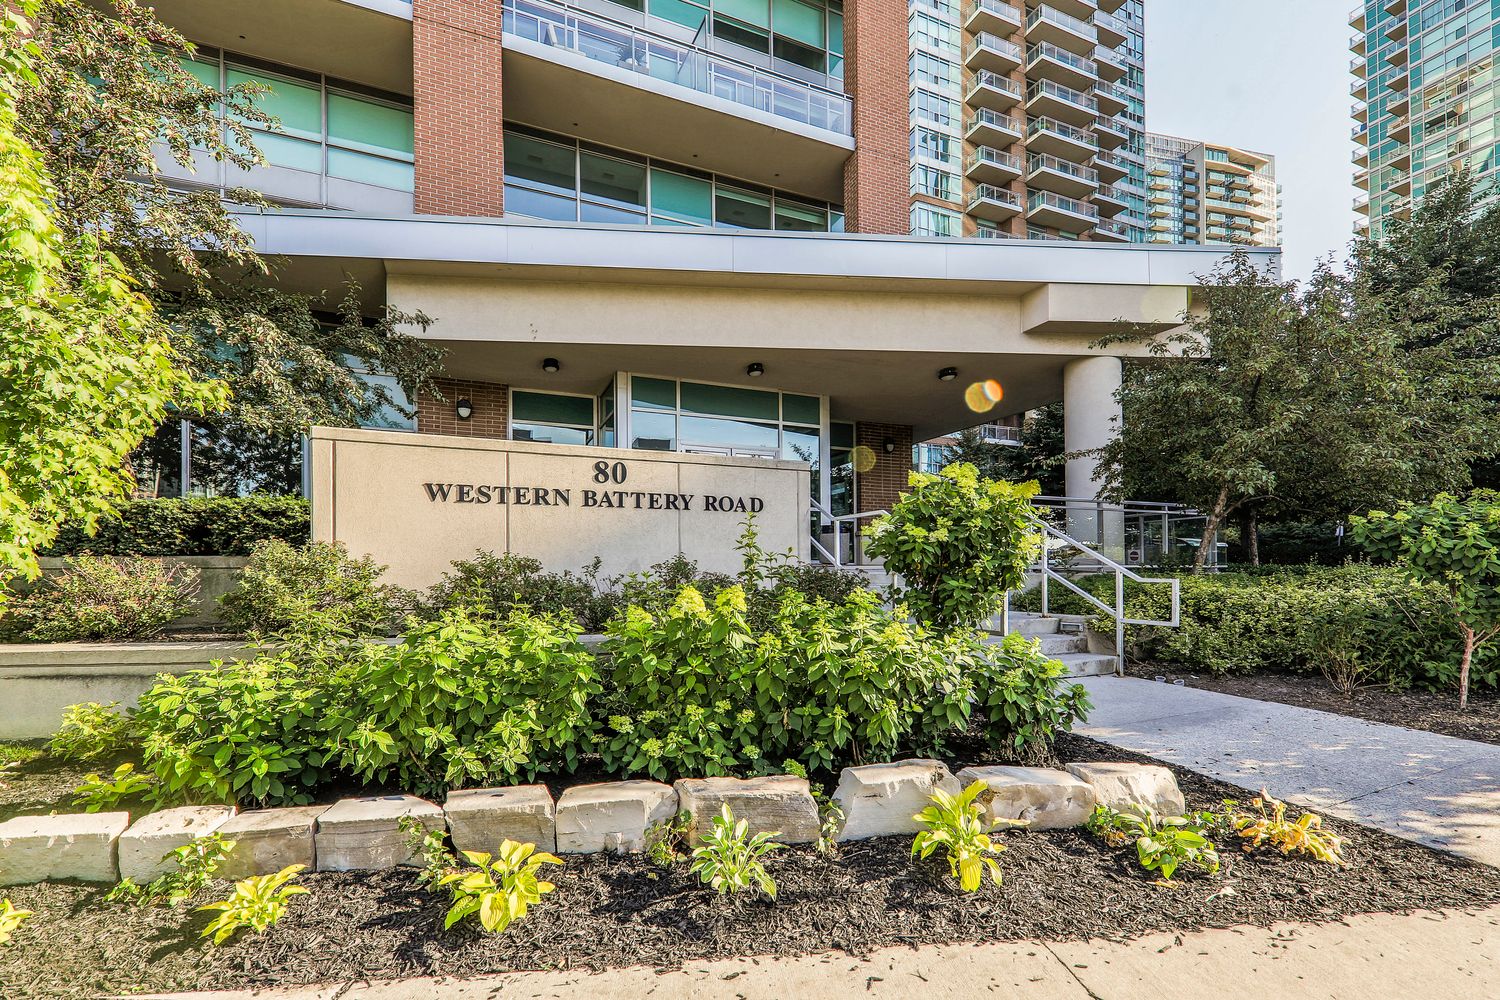 80 Western Battery Road. Zip Condos is located in  West End, Toronto - image #6 of 8